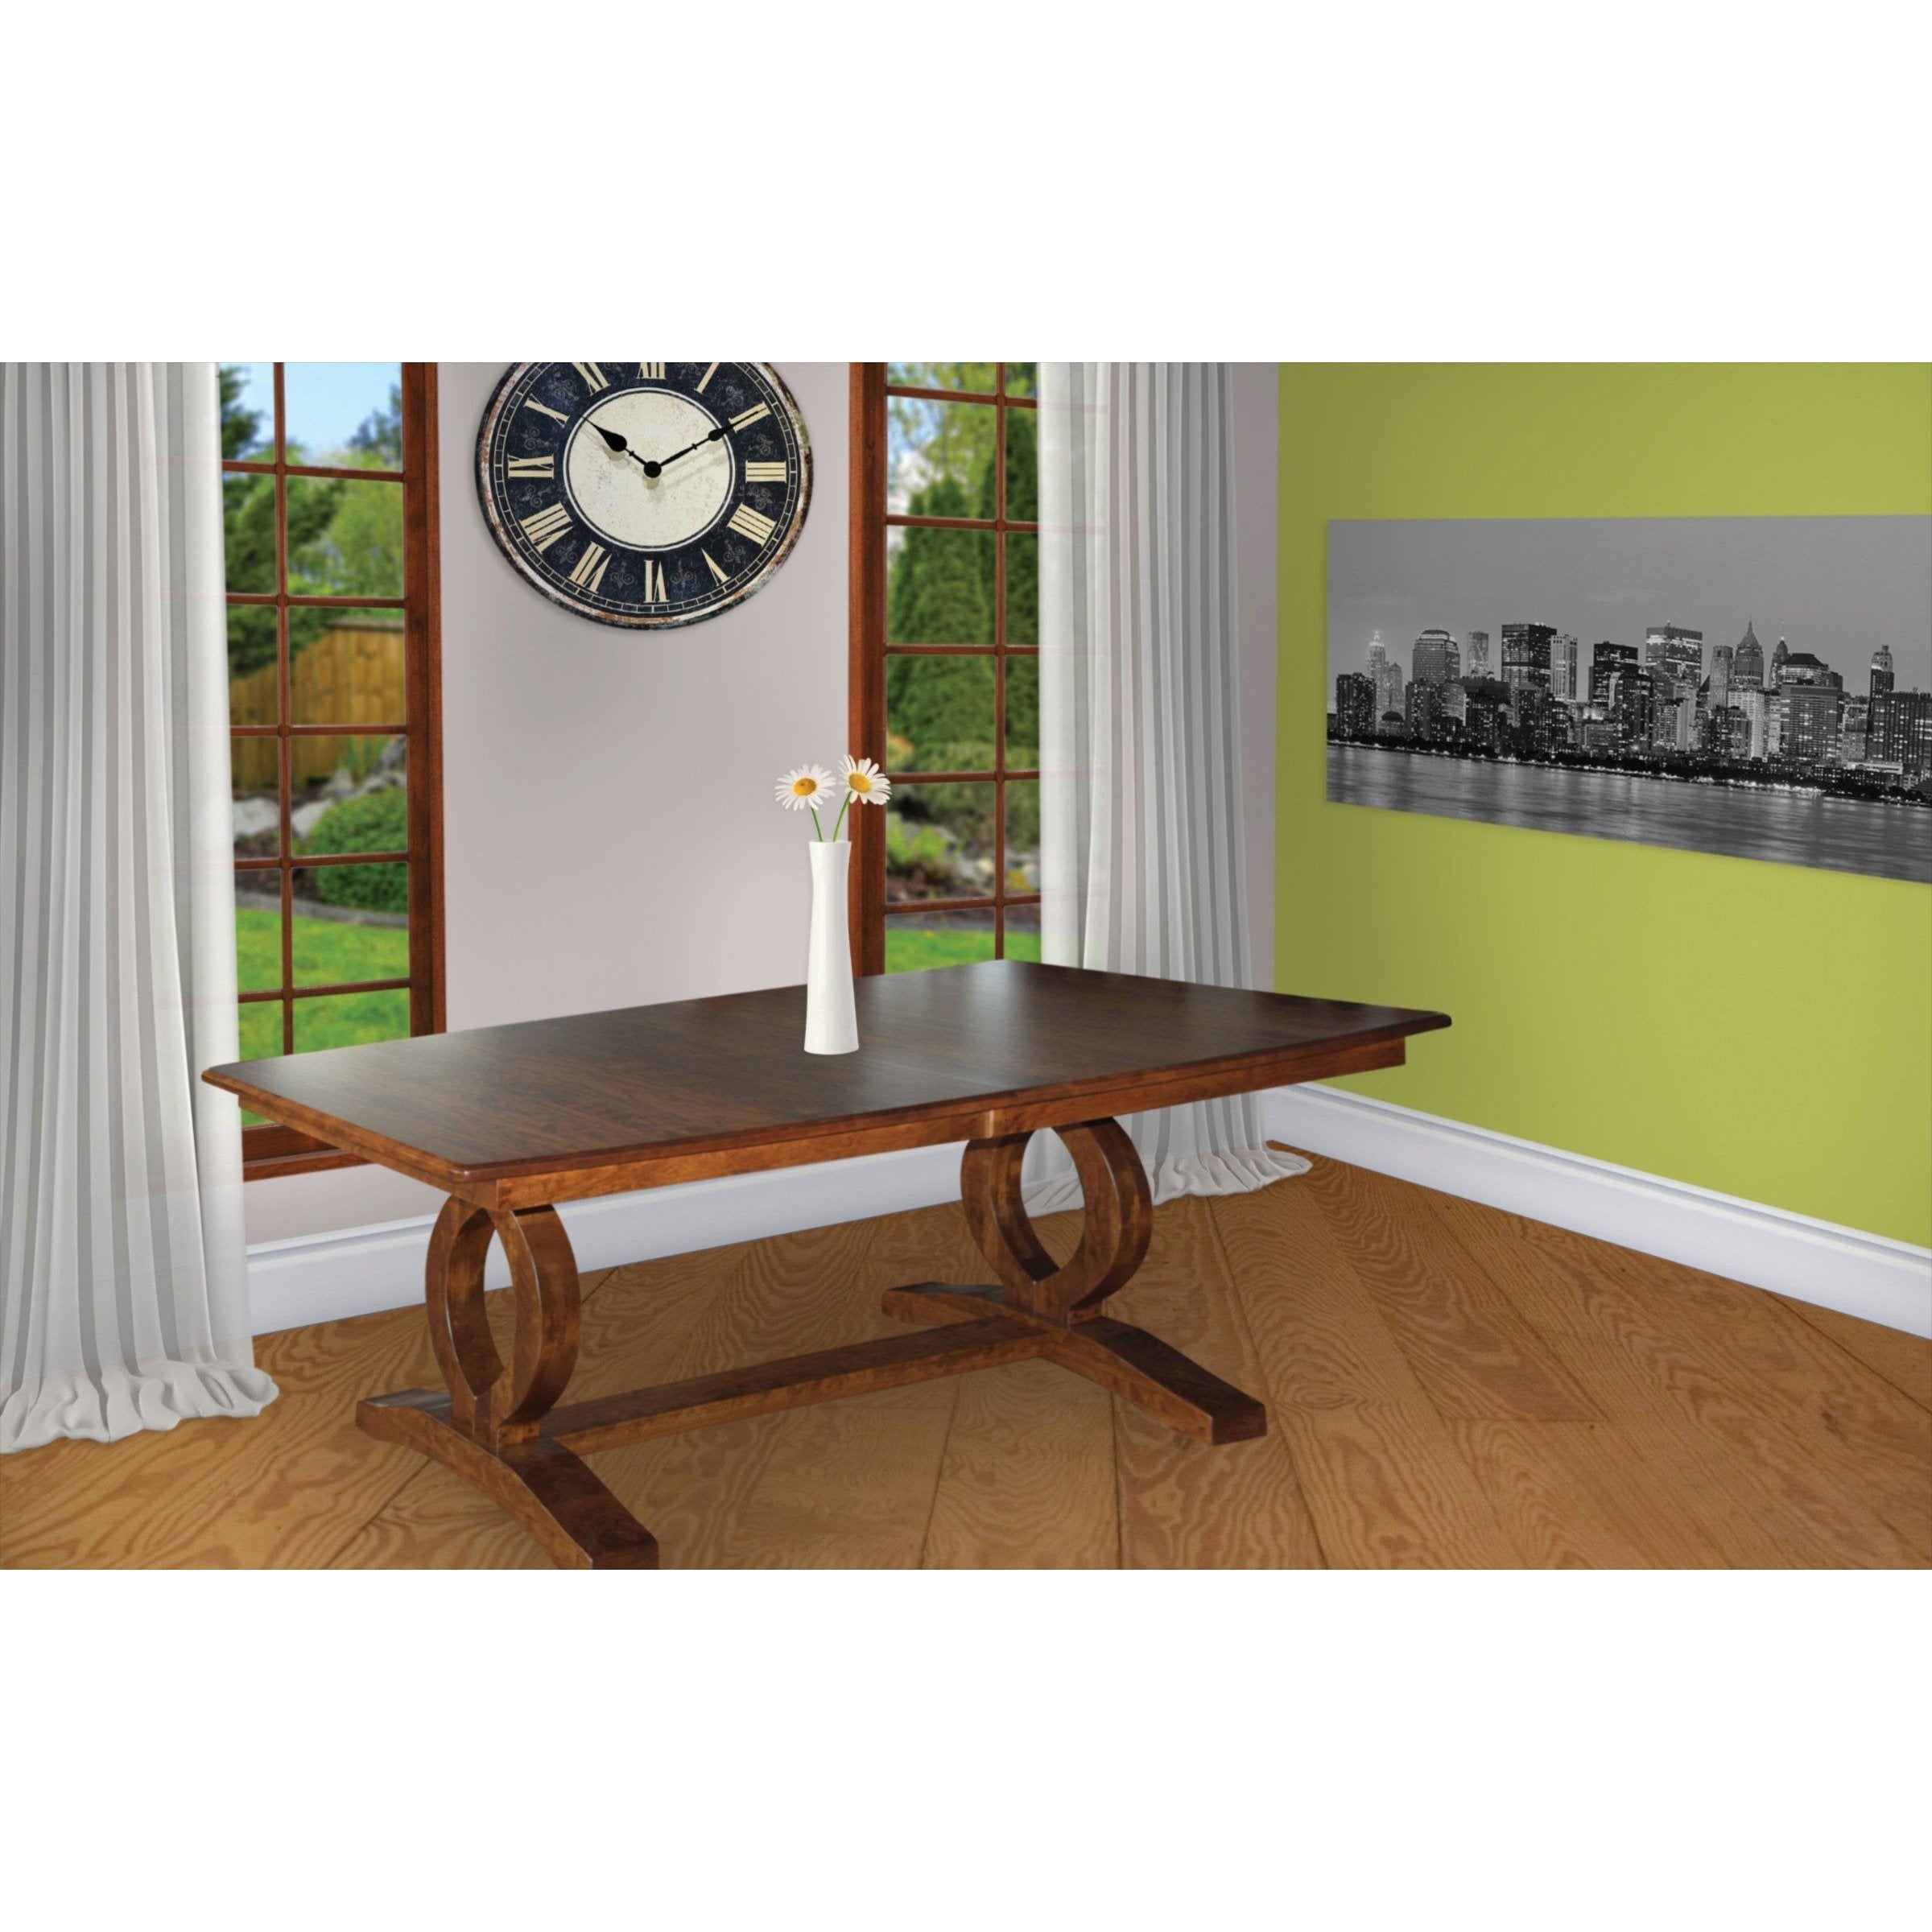 master trestle table in sap cherry wood with michaels cherry stain in room setting